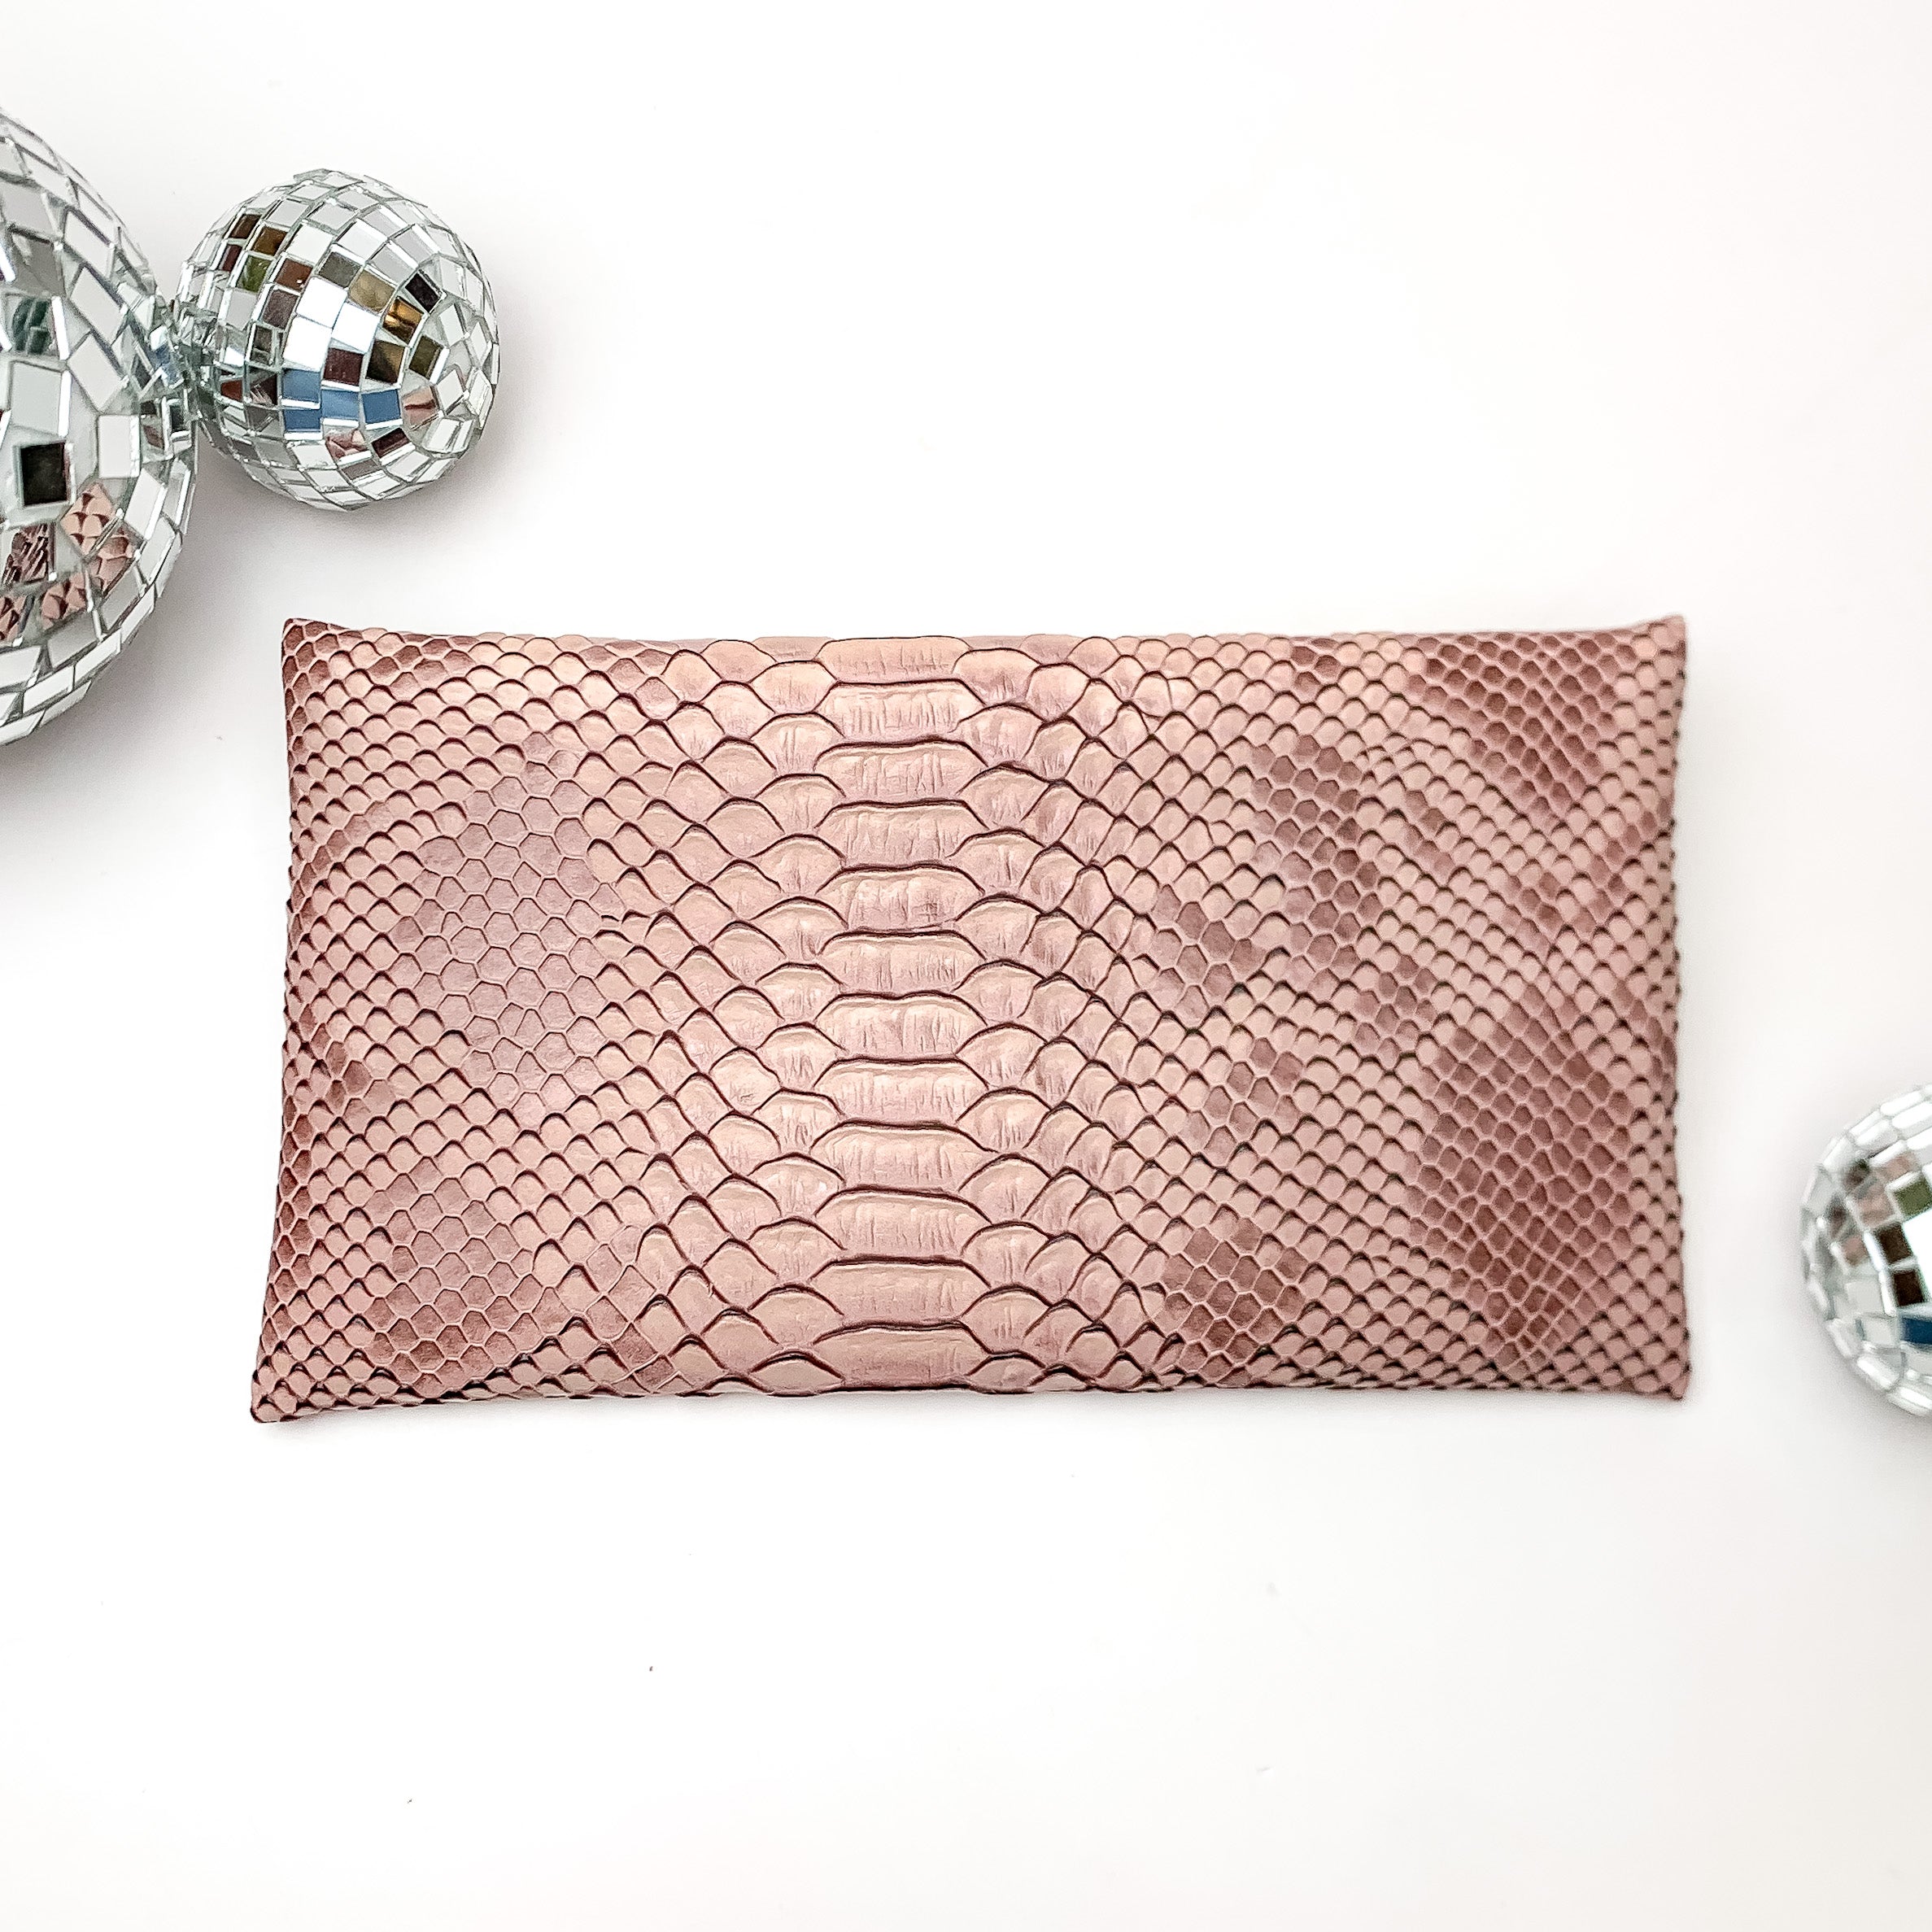 Makeup Junkie | Mini Copperazzi Lay Flat Bag in Dusty Pink Snake Print - Giddy Up Glamour Boutique